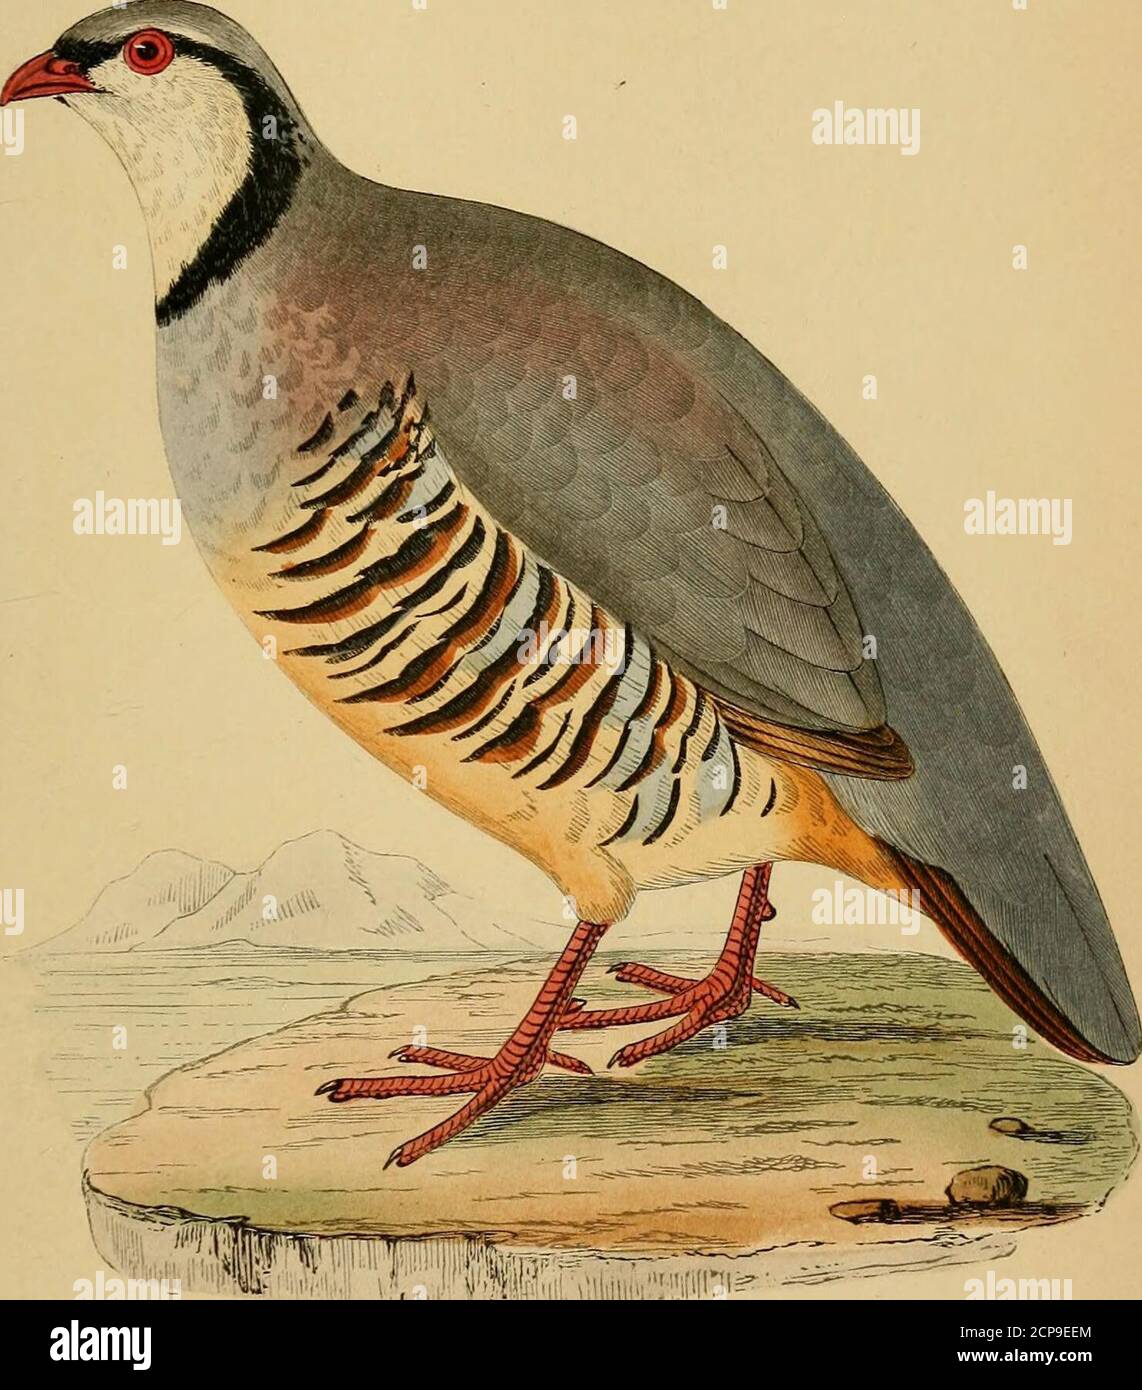 . A history of the birds of Europe, not observed in the British Isles . OL. III. 2 K 242 GALLING. Family PERDICID^E. (Bonaparte.) Genus Perdtx. f Brisson.) GREEK PARTRIDGE. Perdix Grceca. Perdix Grceca, rufa, saxatilis,Bartavelle Grecque,Stein-rothehuhn, Rot-huhn,or Weltsch-Paeb-hun,Coiurnice,AoJcer-Hoena, Gesner; Icones Avium, p. 64, 1553.Brisson; 1760. LlNN^US. VlEILLOT. Meyer et Wolff.Of the French. Of the Germans. Savi. Of the Swedes. Specific Characters.—Throat and upper part of the front neckwhite or cream-coloured, which is separated from the unicolorousdove-coloured cross by a black ba Stock Photo